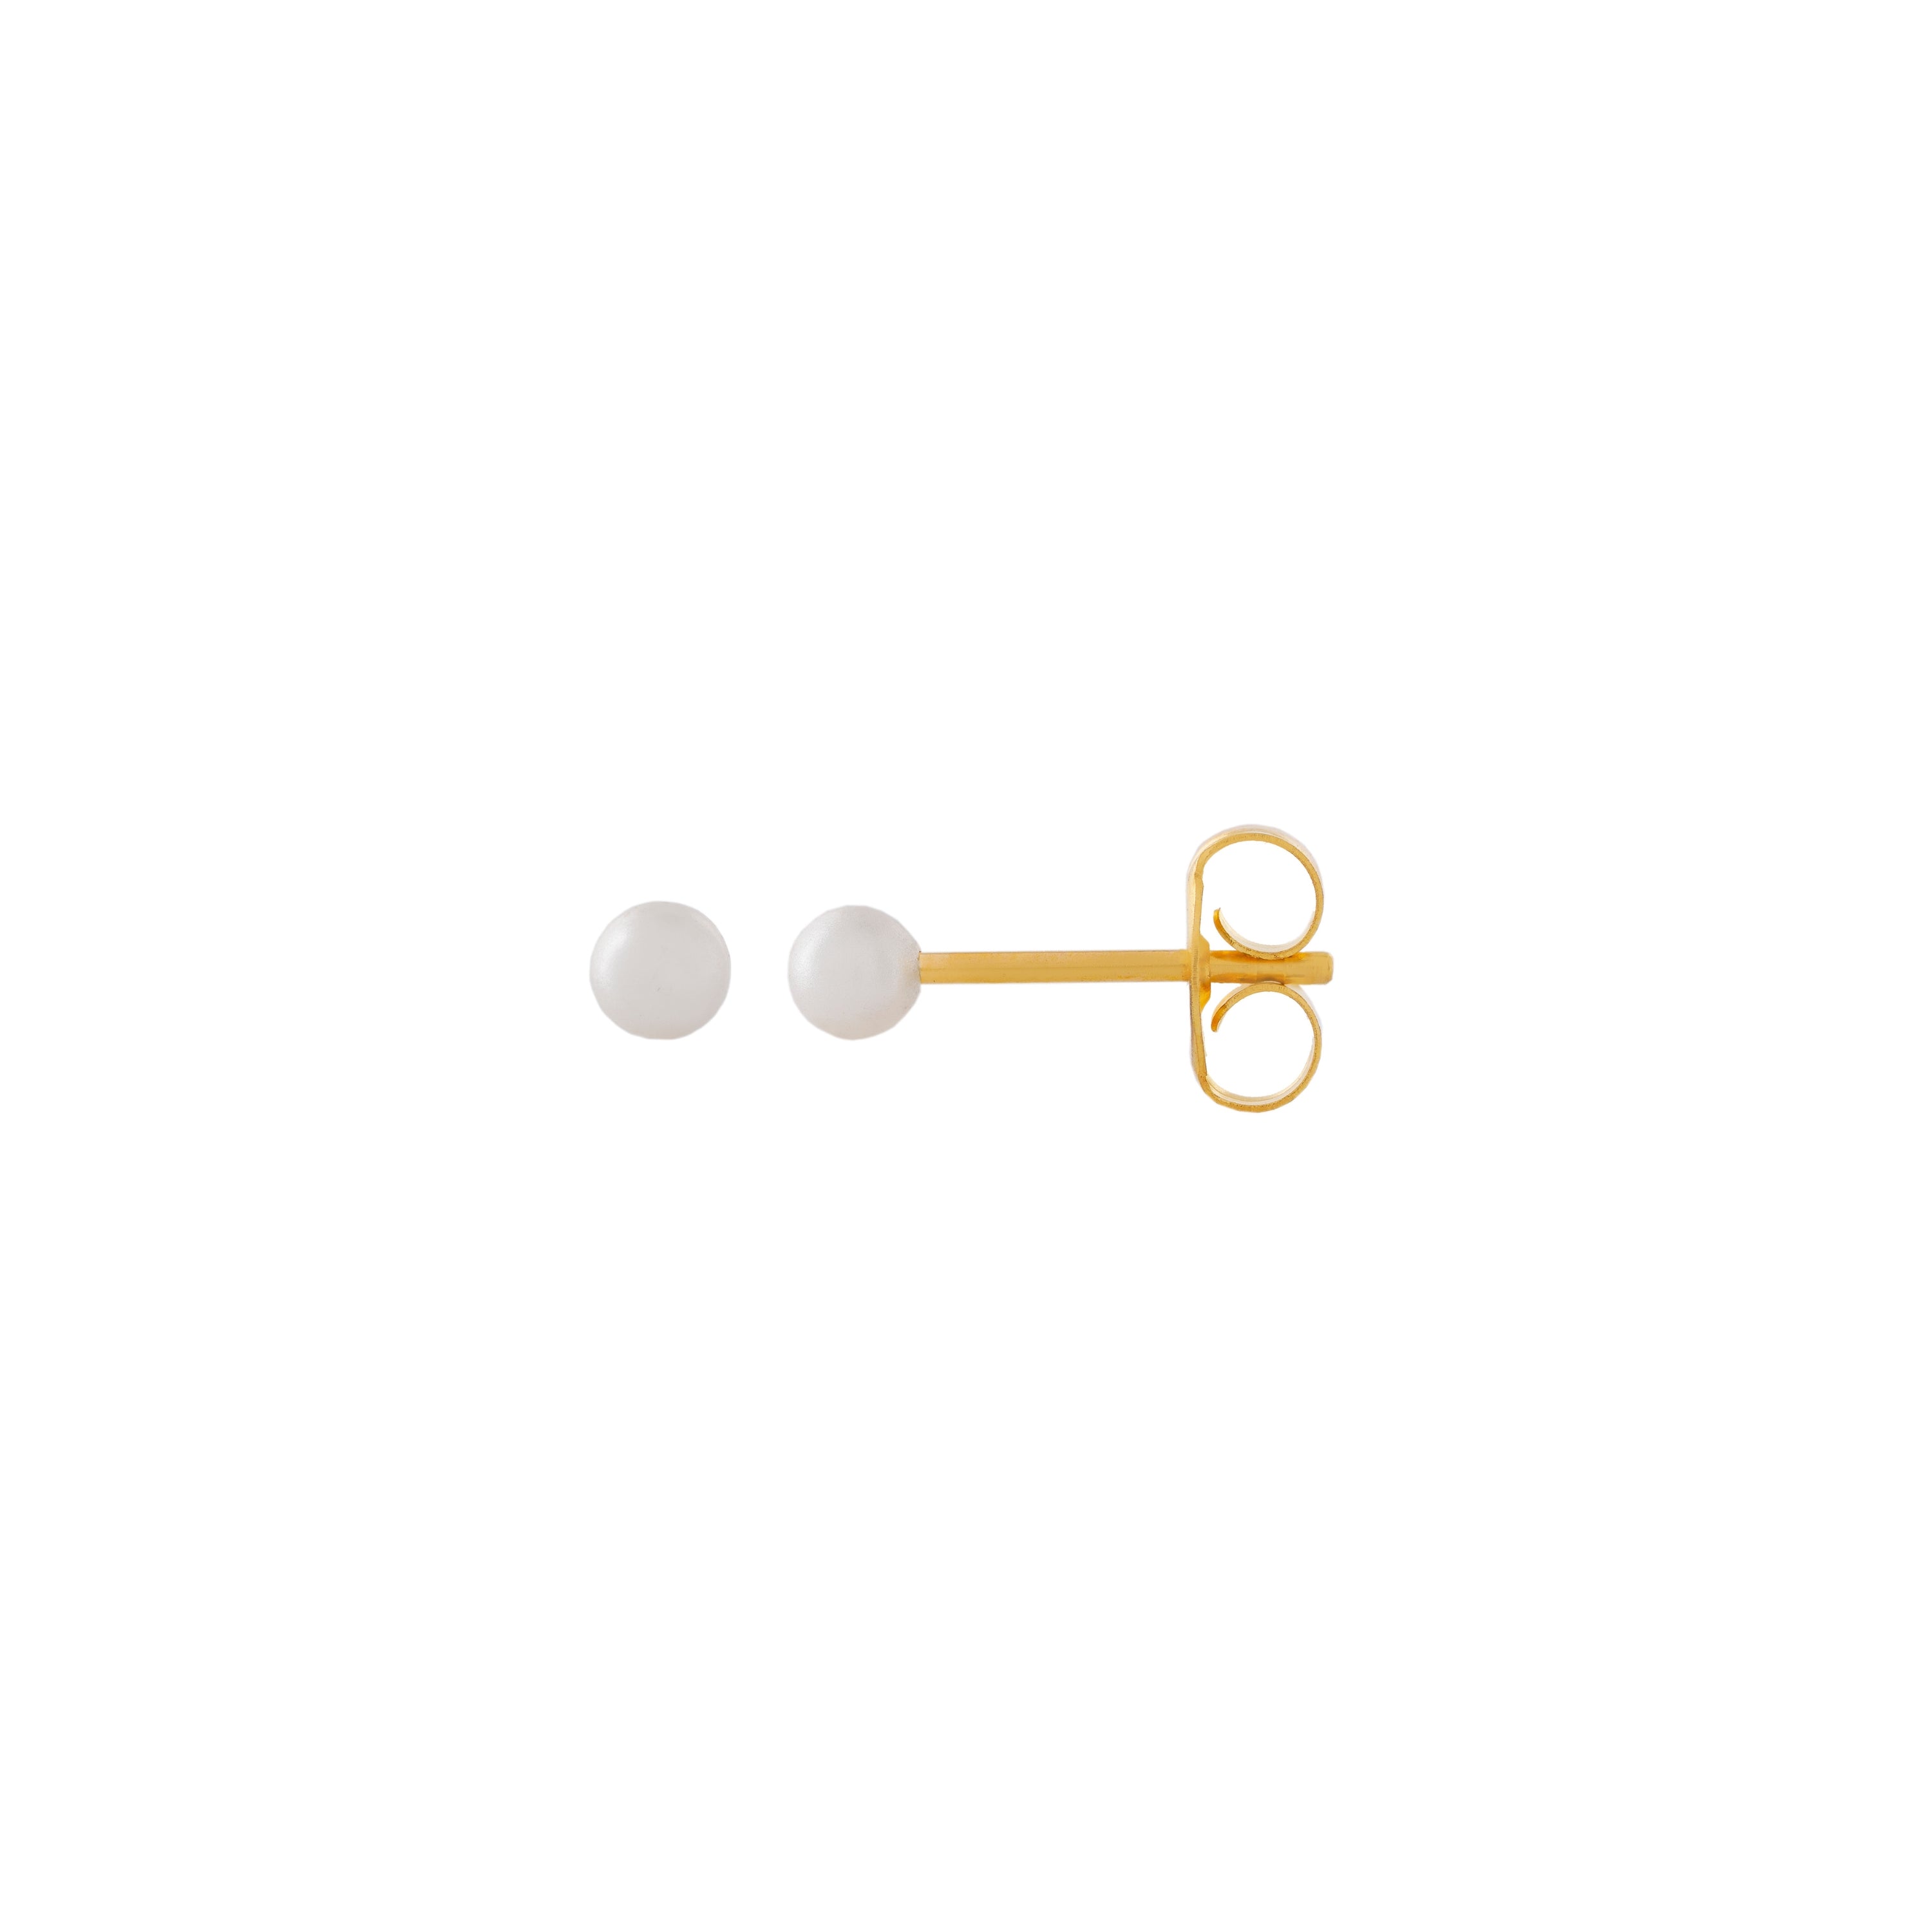 3MM White Pearl 24K Pure Gold Plated Ear Studs | MADE IN USA | Ideal for everyday wear